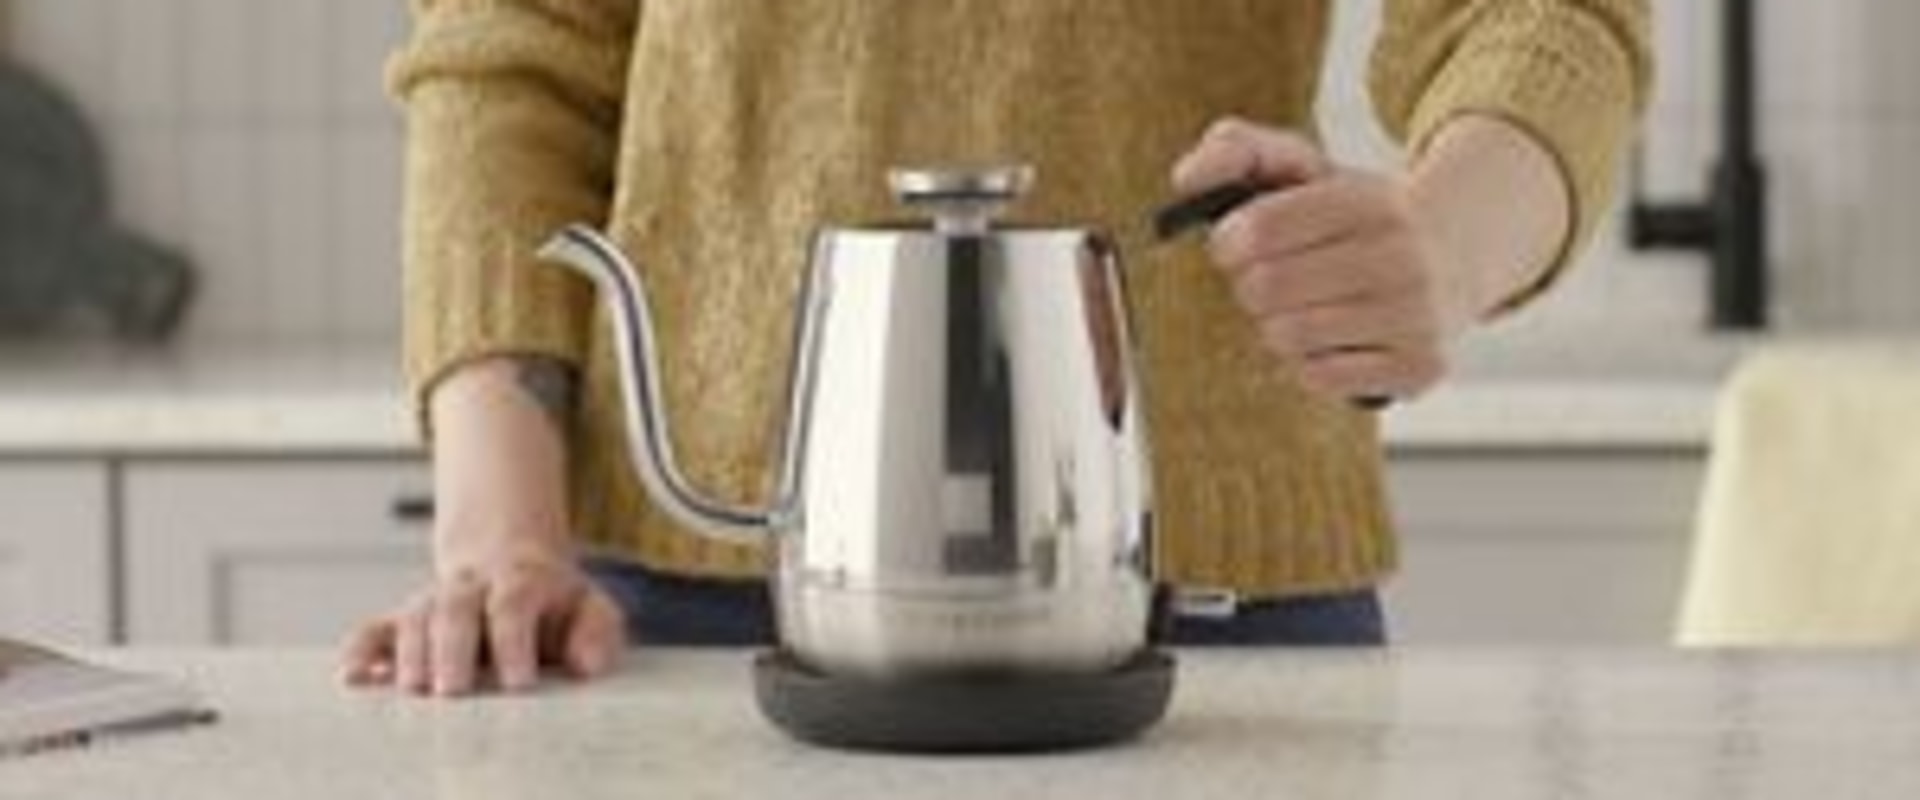 What uses more electricity kettle or coffee machine?